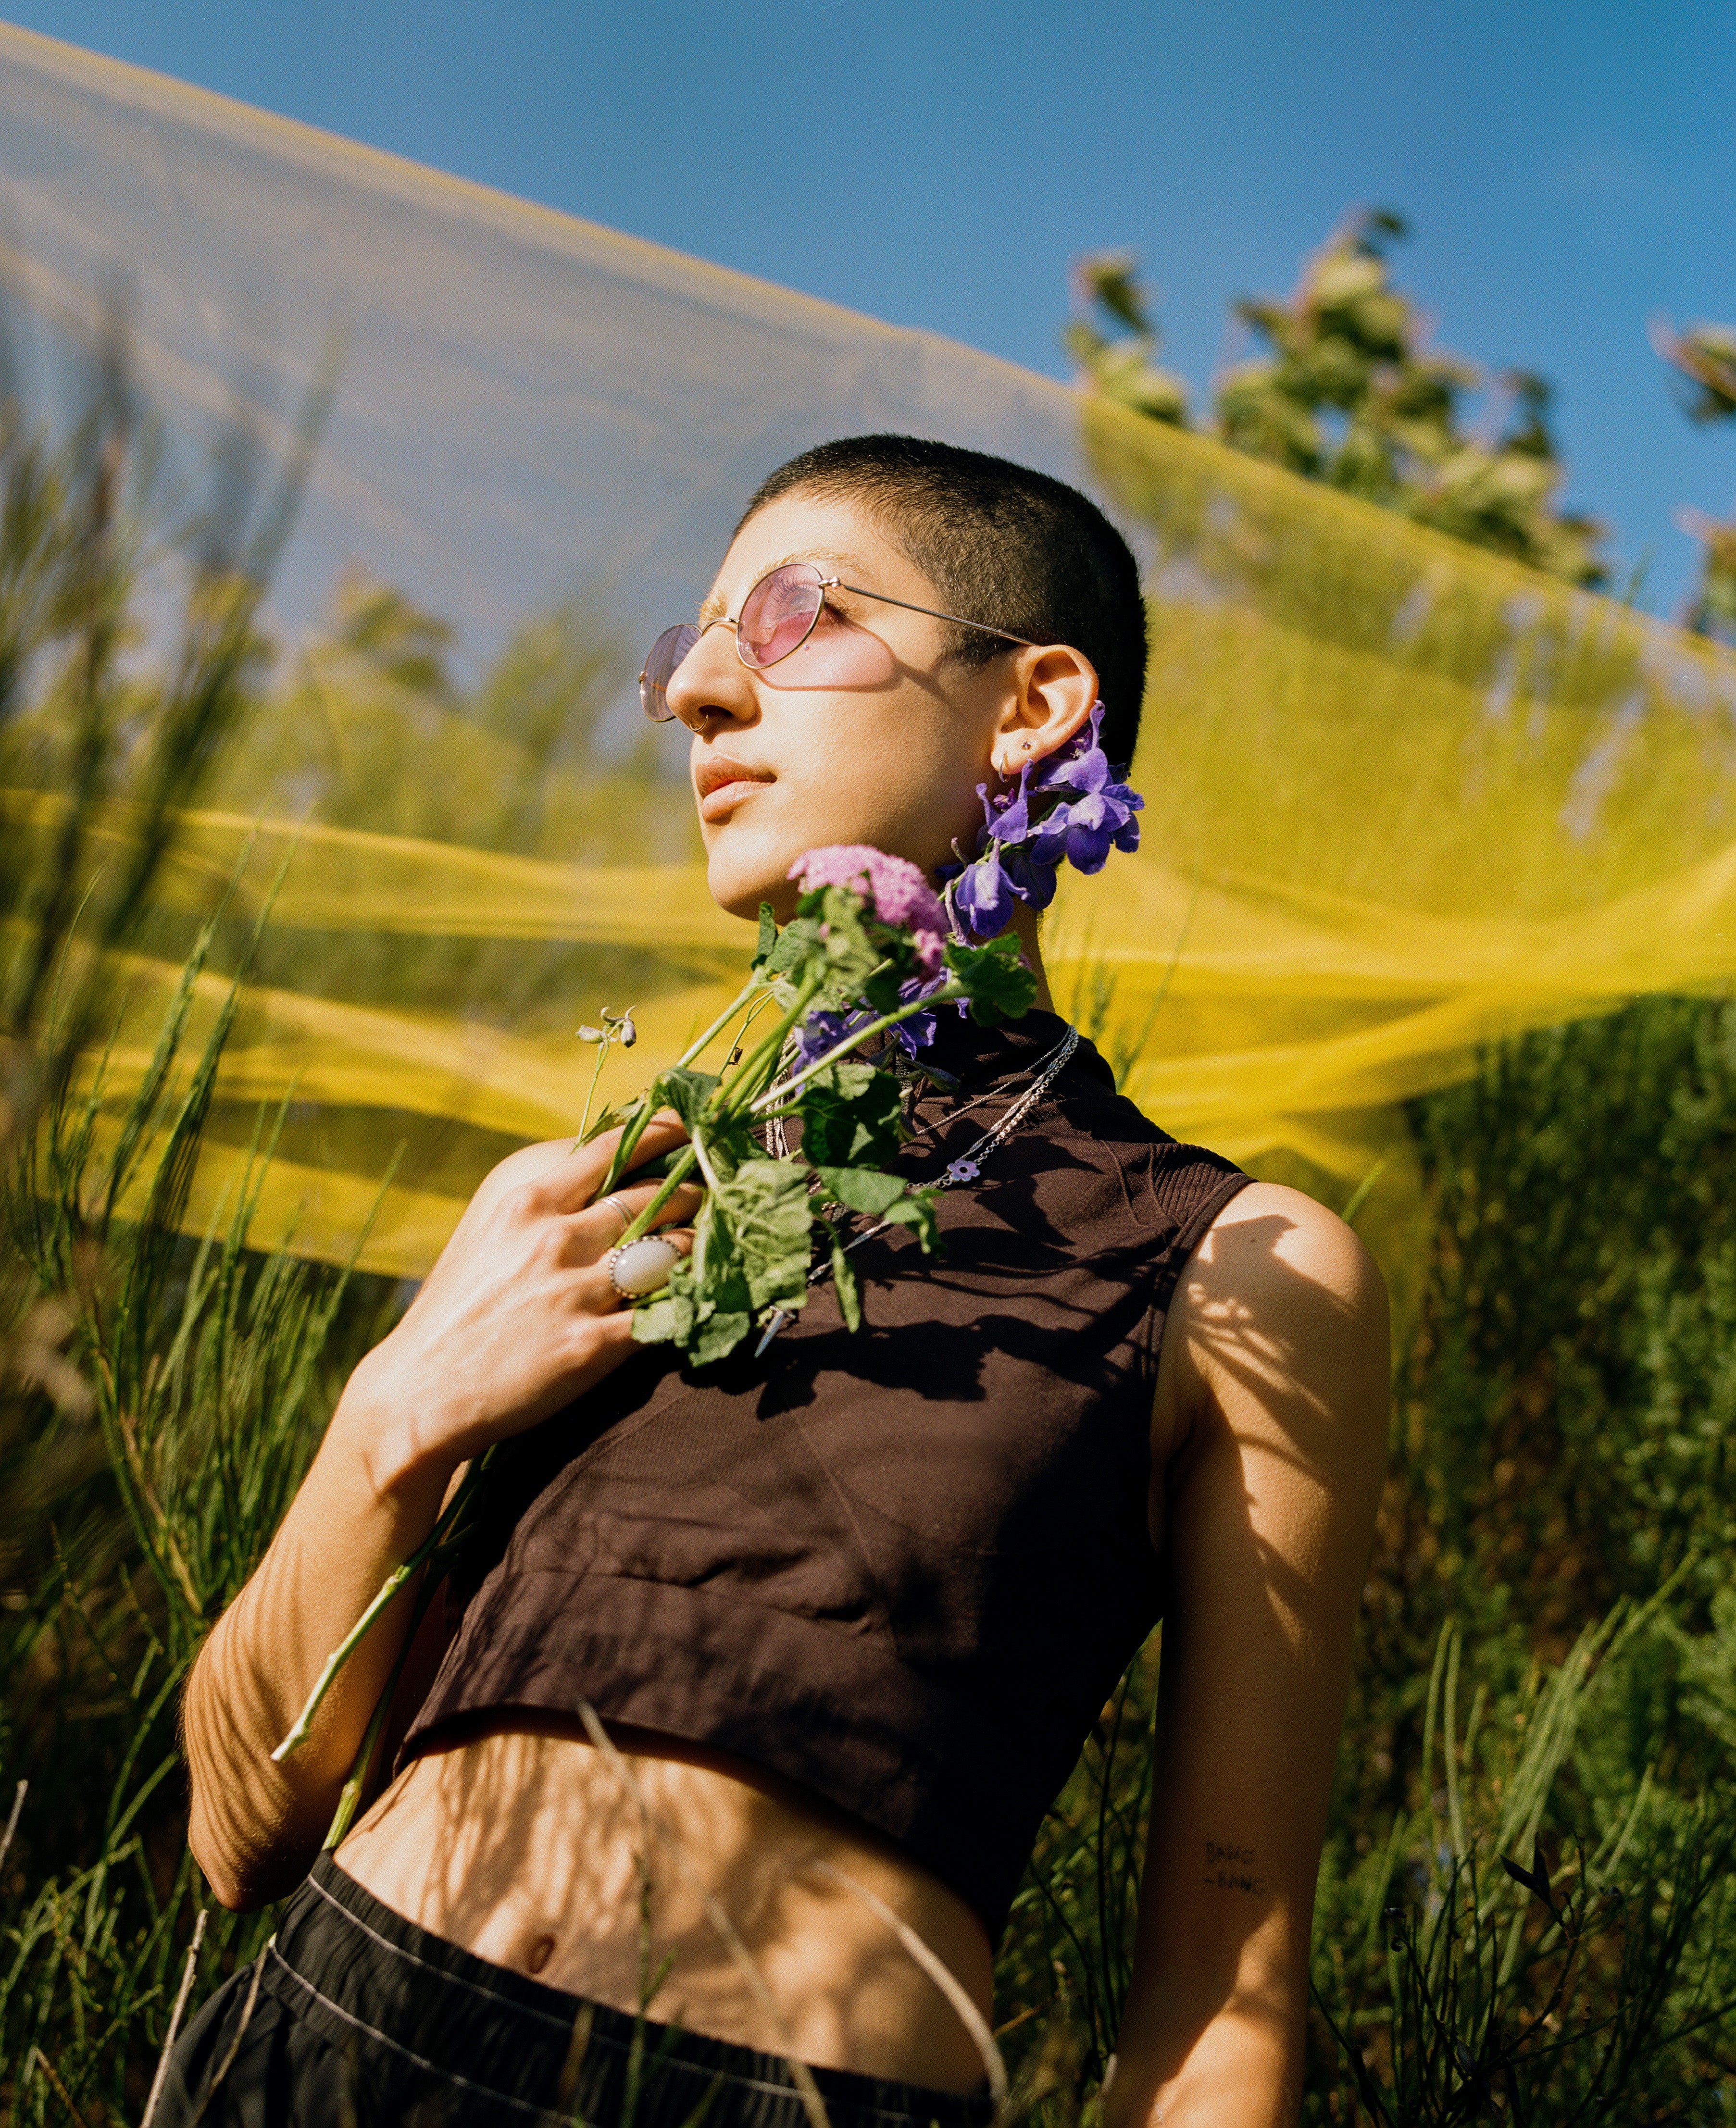 Jorum Studio Winter Campaign model poses with flowers in front of yellow gauze